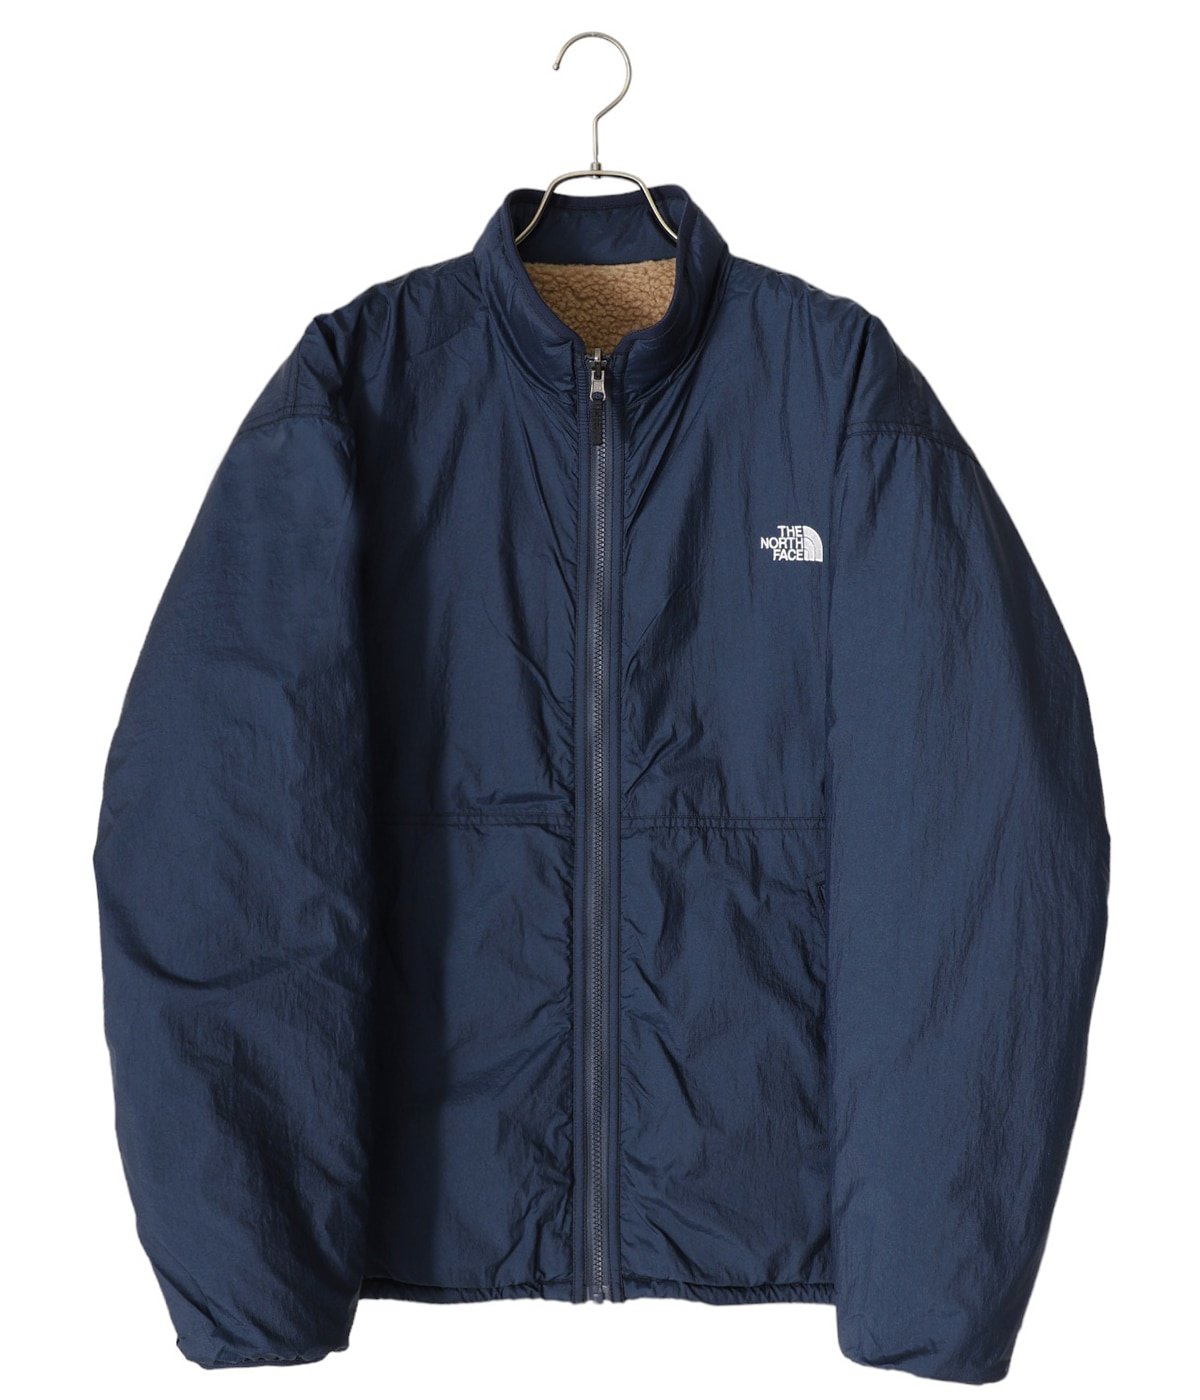 Reversible Extreme Pile Jacket | THE NORTH FACE(ザ ノースフェイス